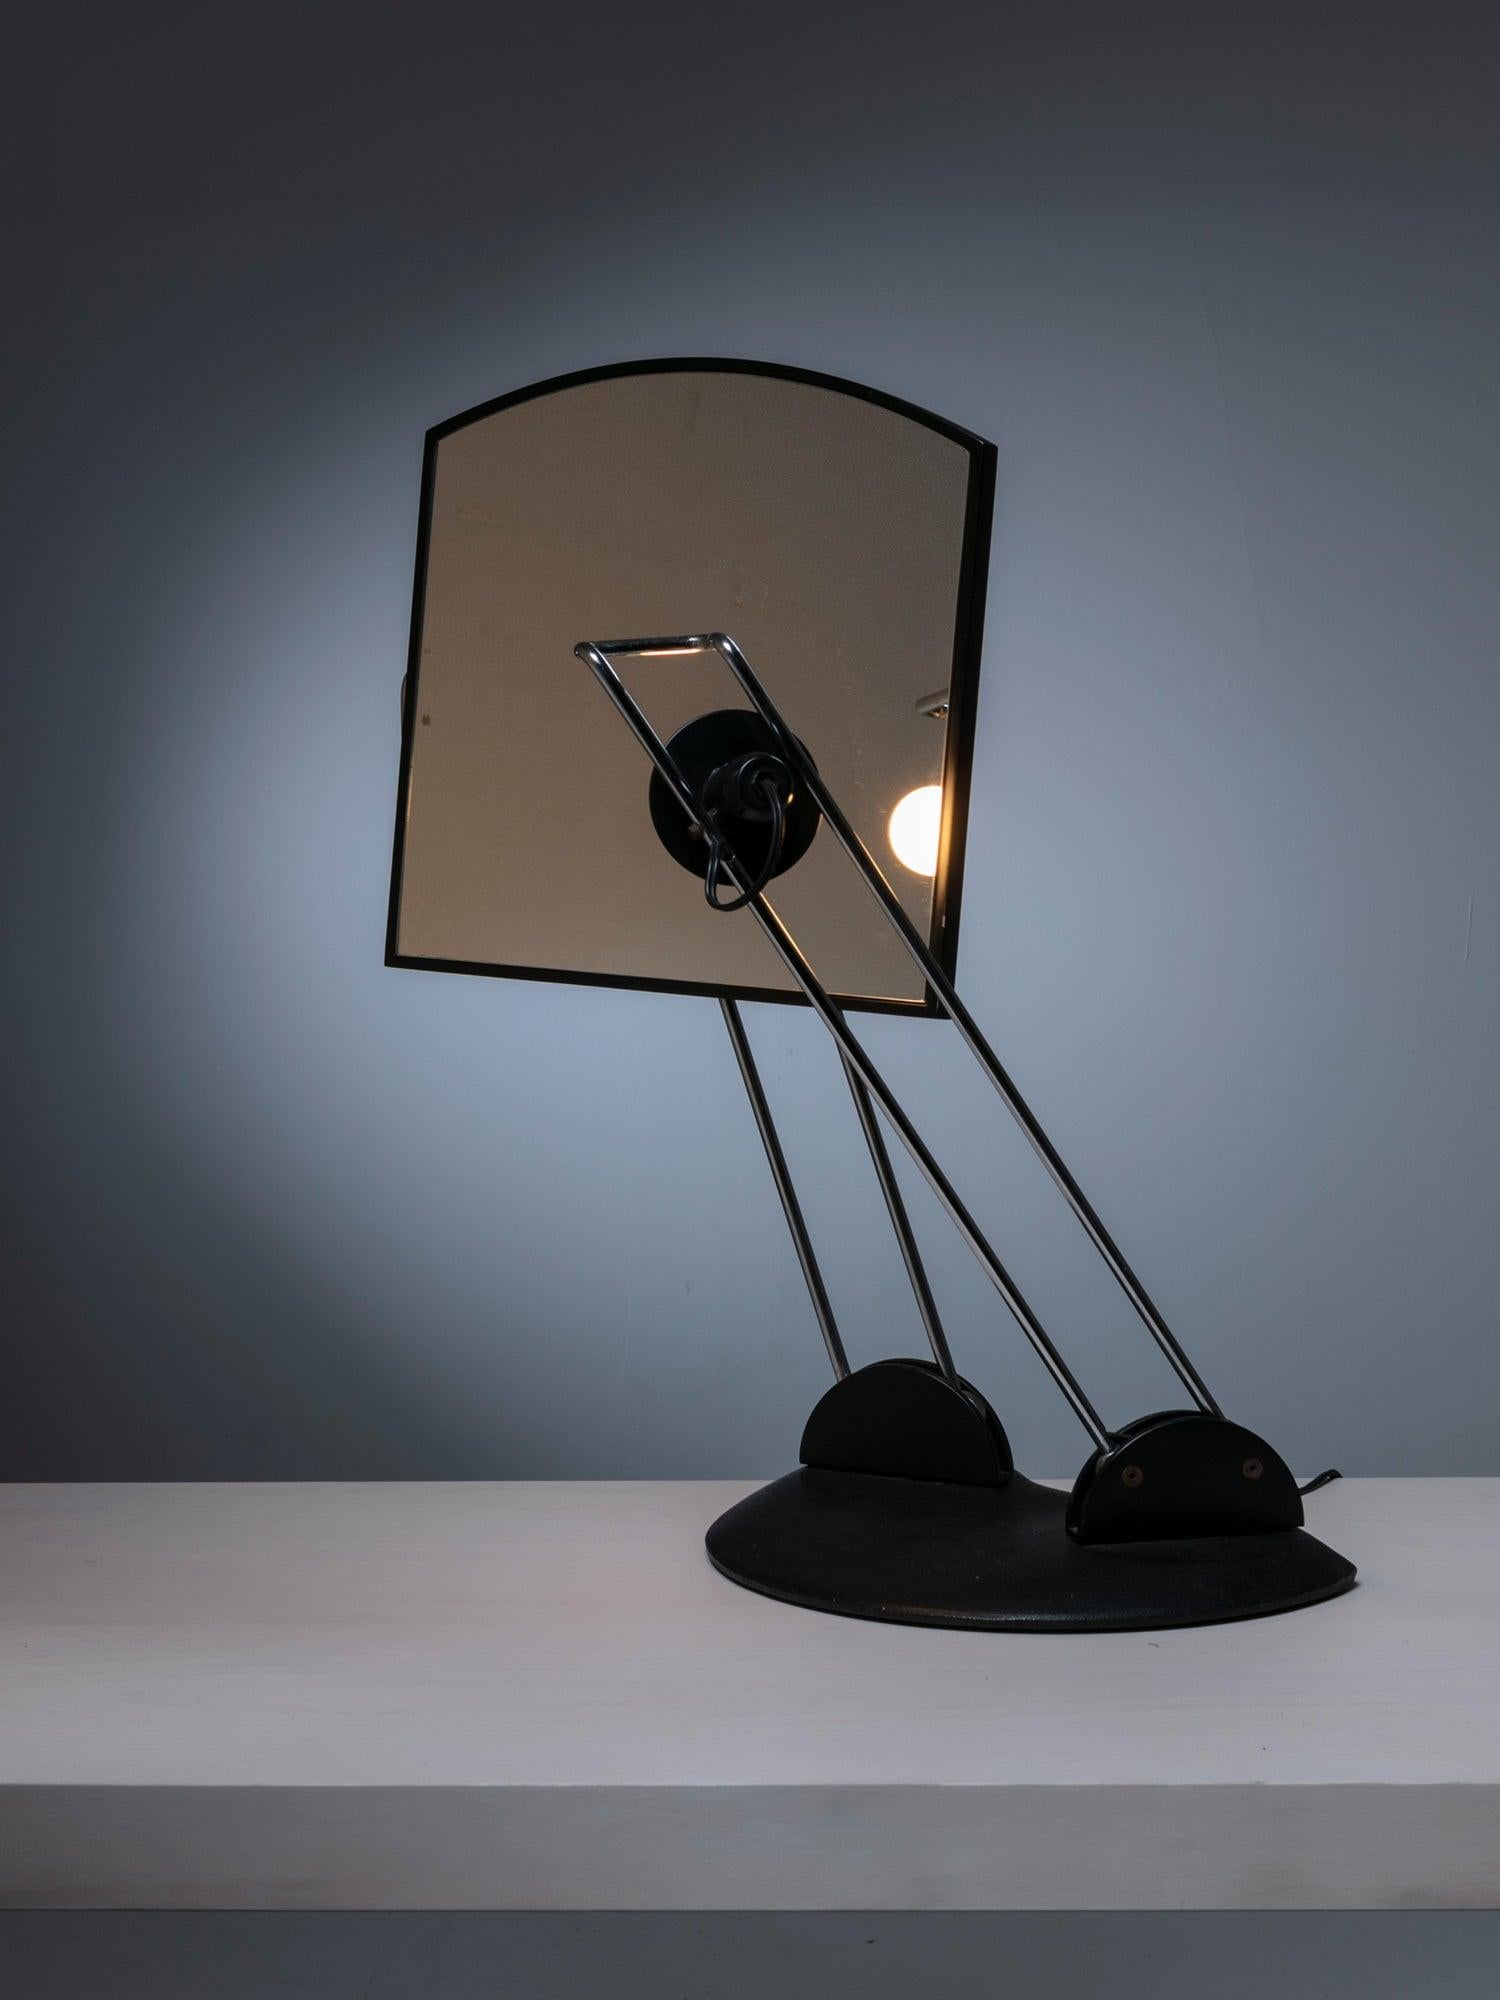 Rare adjustable table mirror with lamp.
Both mirror and lamps arms move separately and are connected on a cast iron base.
Minimal research on the table mirror theme.
Piece can also be used on a vanity or as a table lamp, reflecting and diffusing